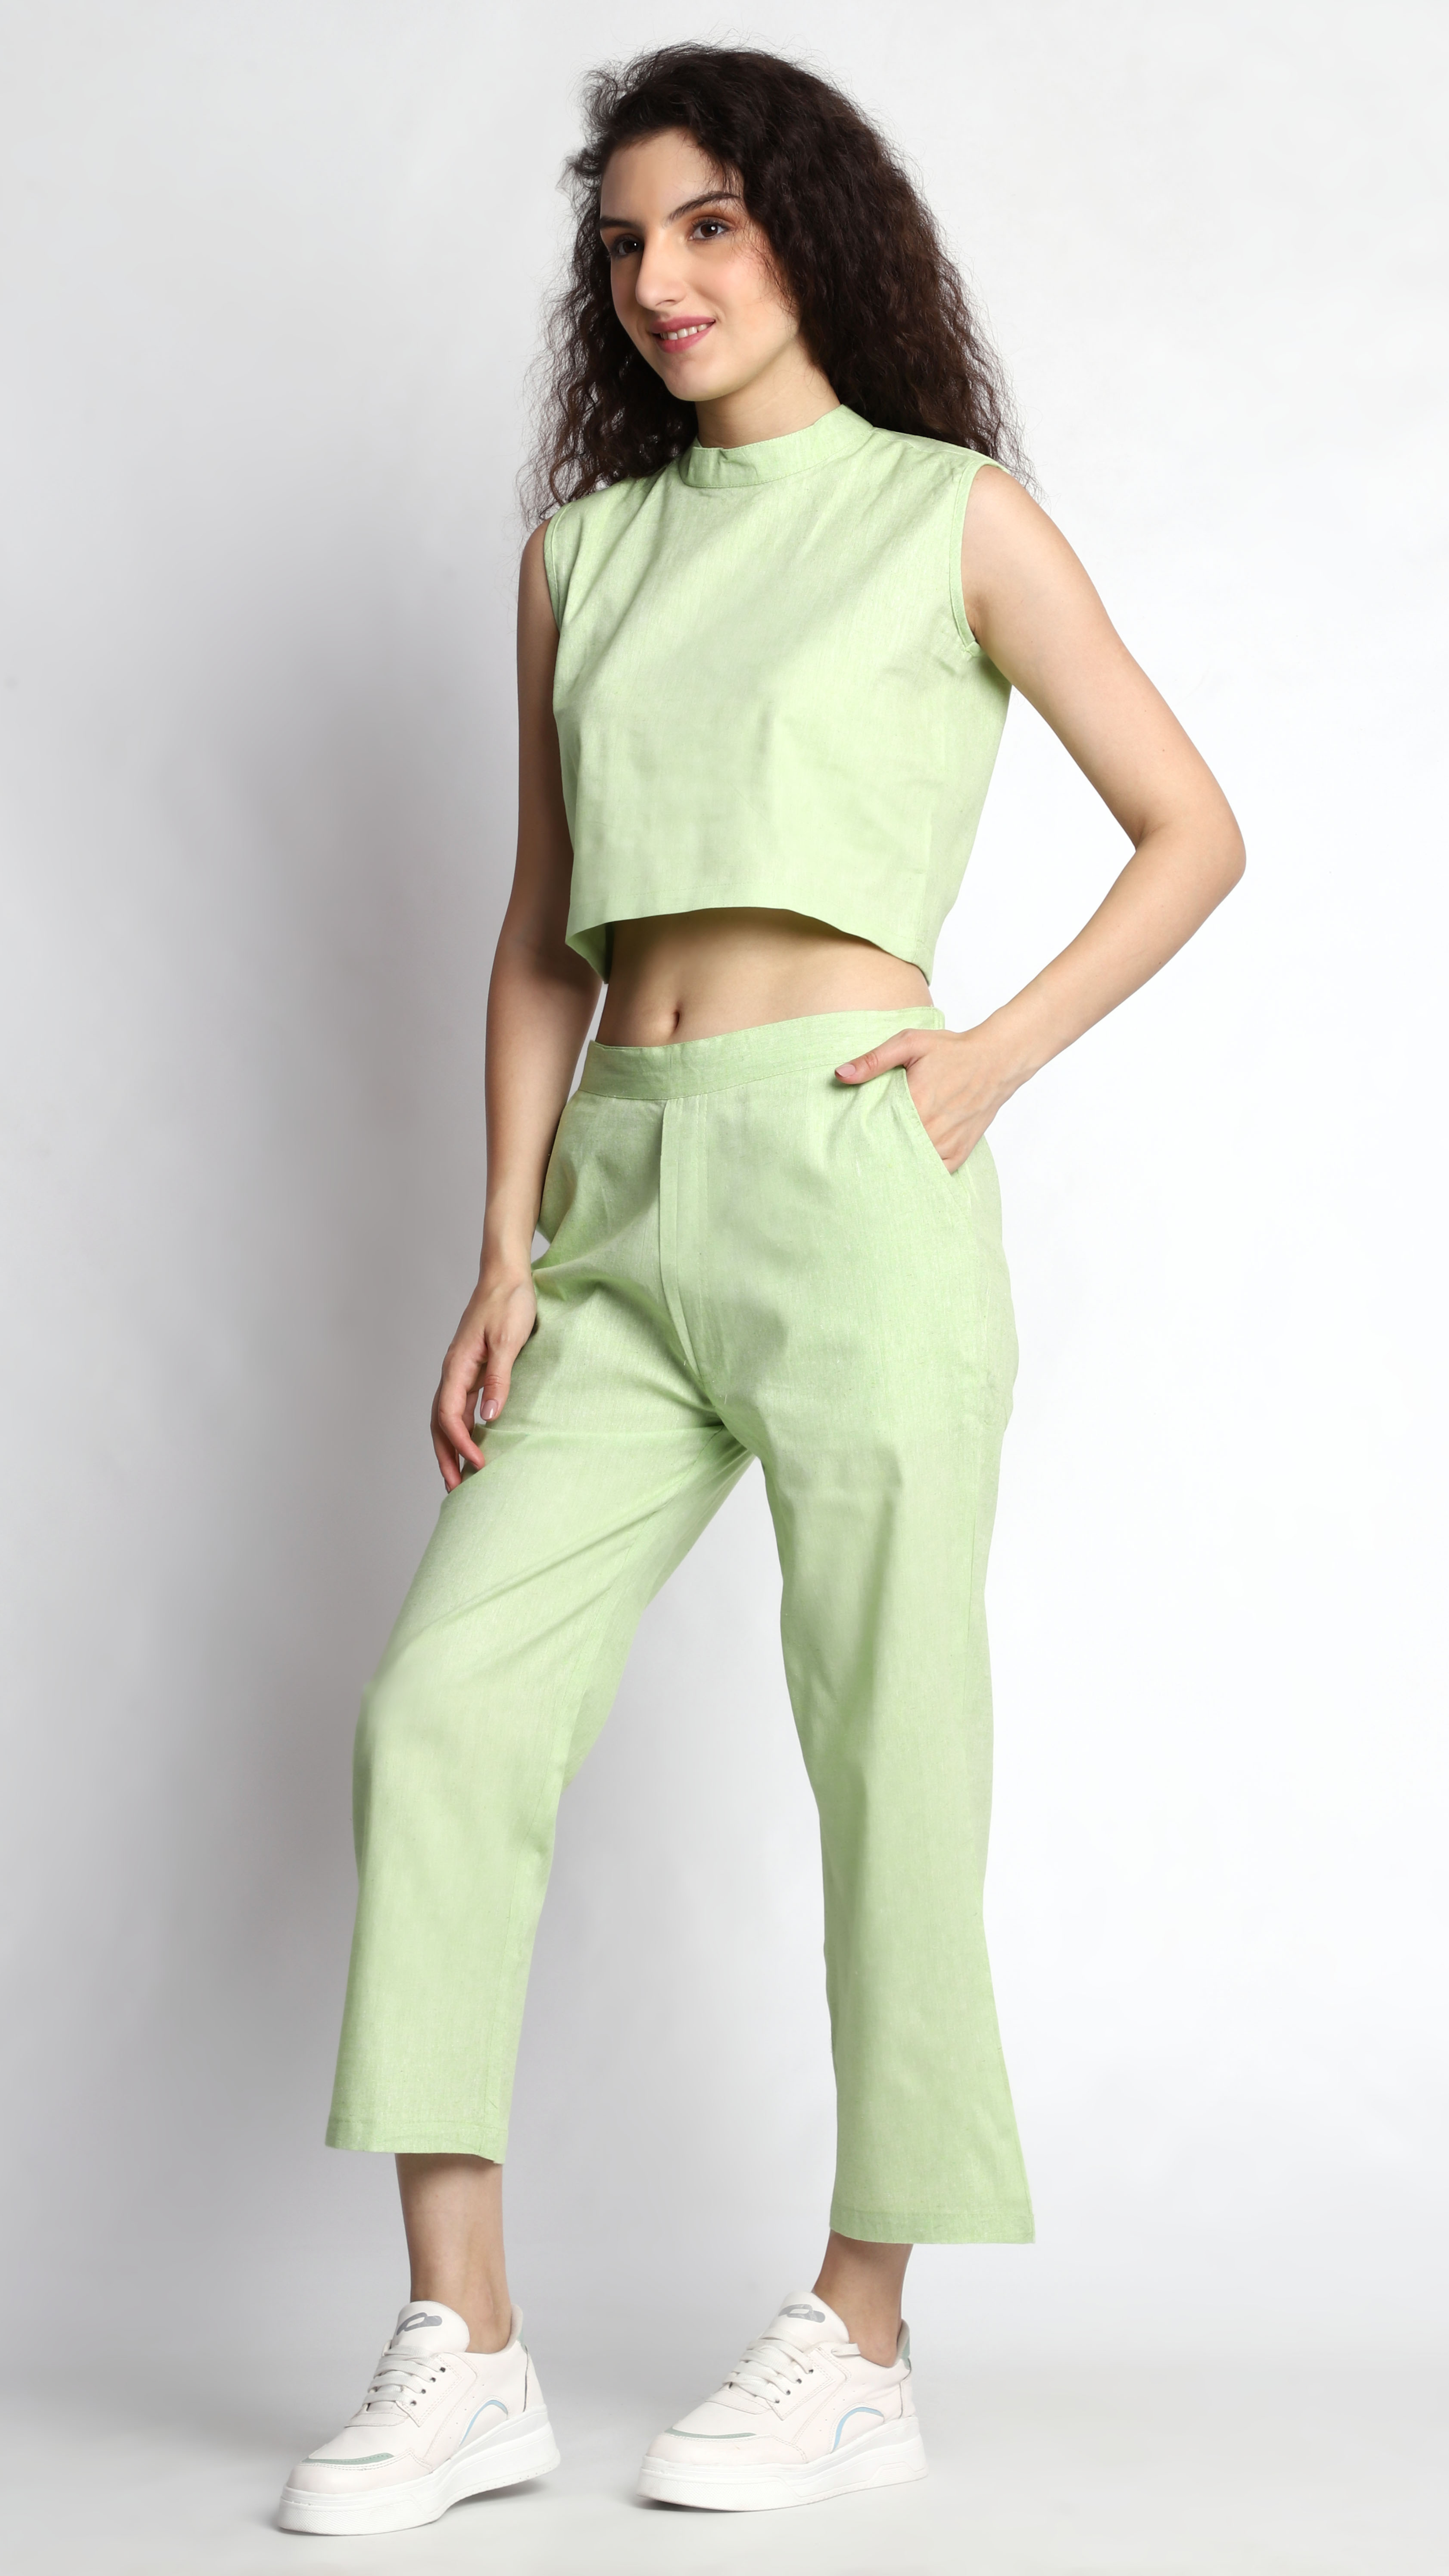 Chic Sleeveless Crop Top Co-ord Set